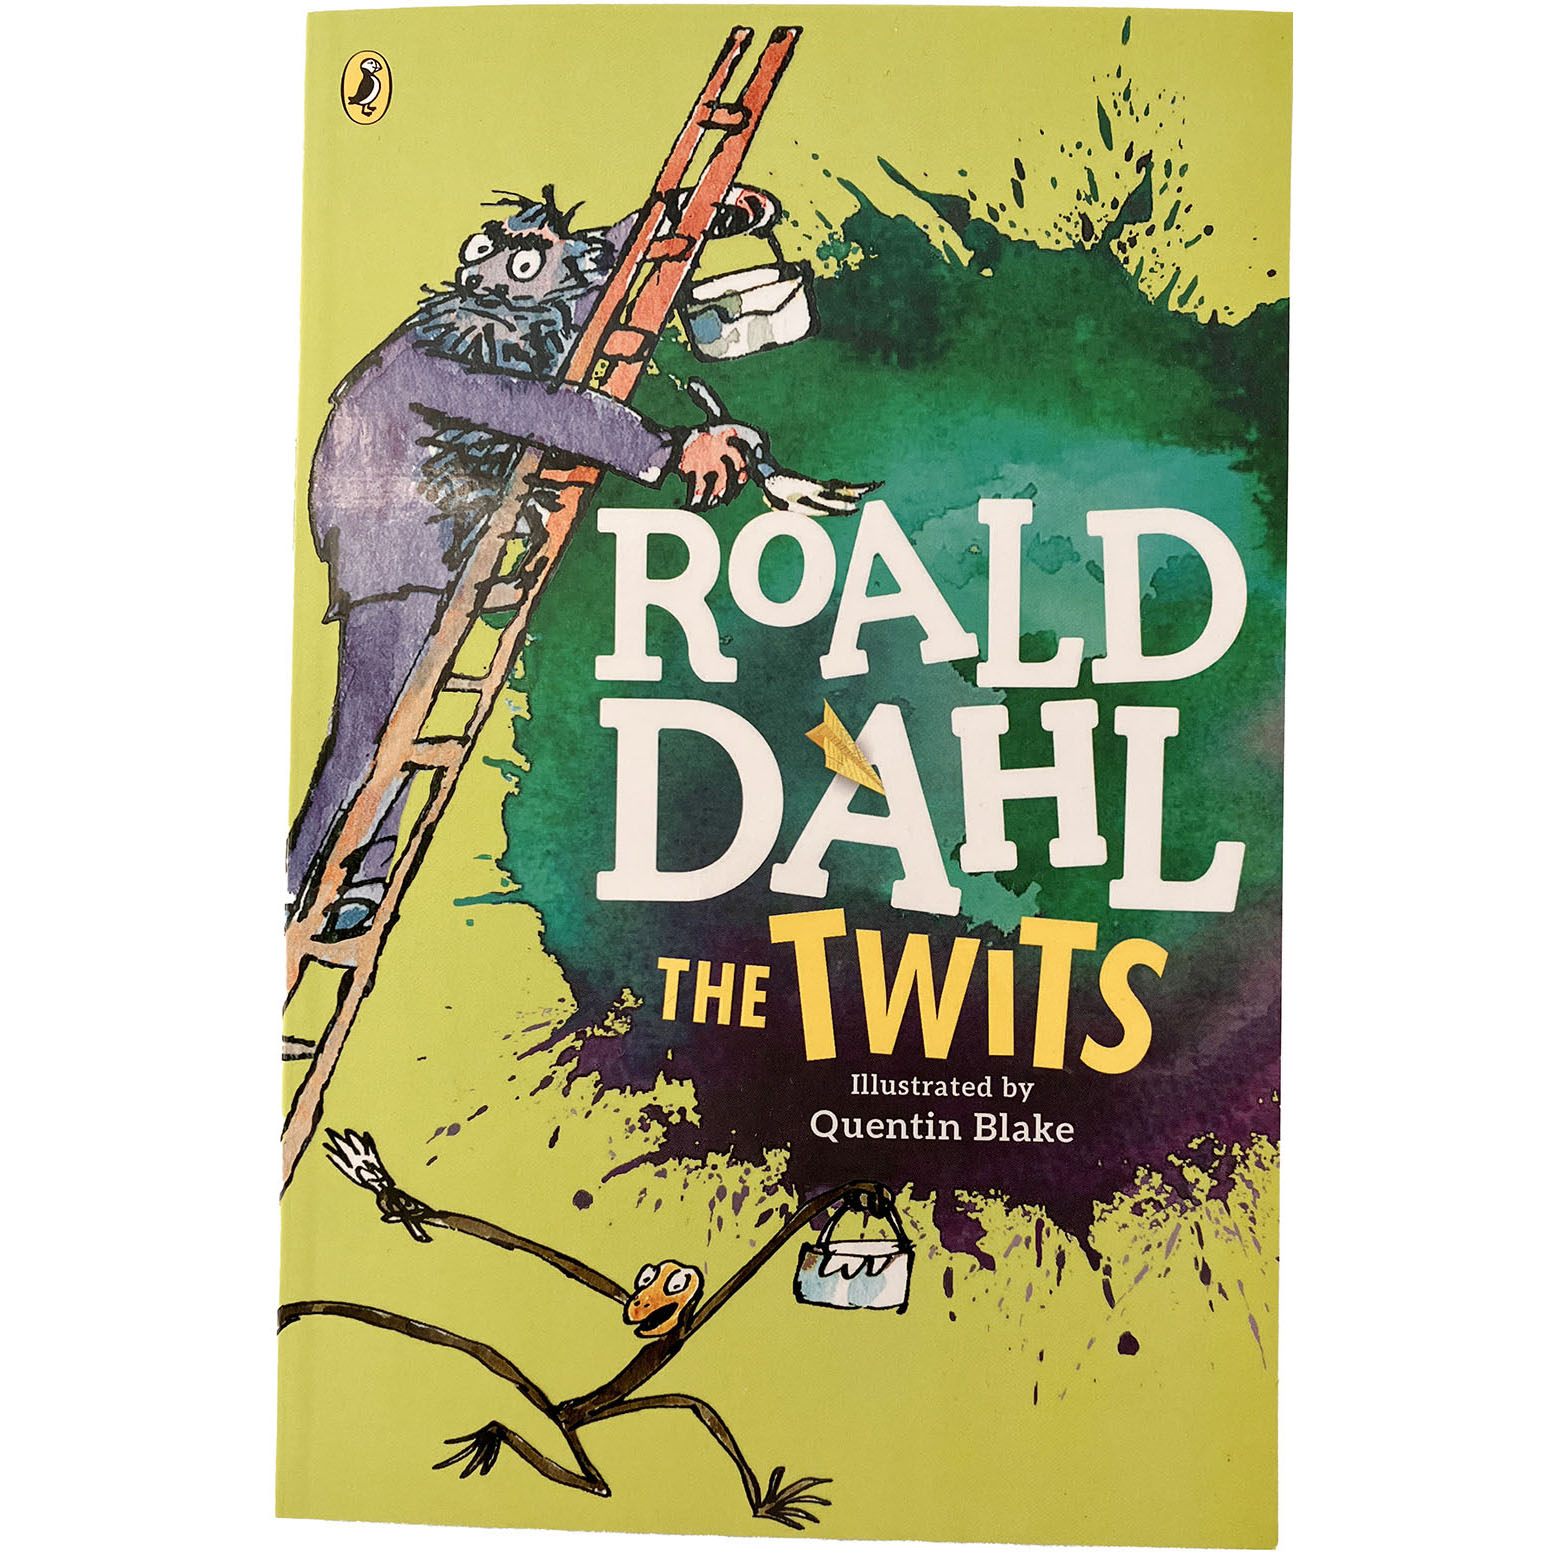 The Twits by Roald Dahl, Feb. 2016, Paperback, Brand New, FREE Postage ISBN 9780141371474